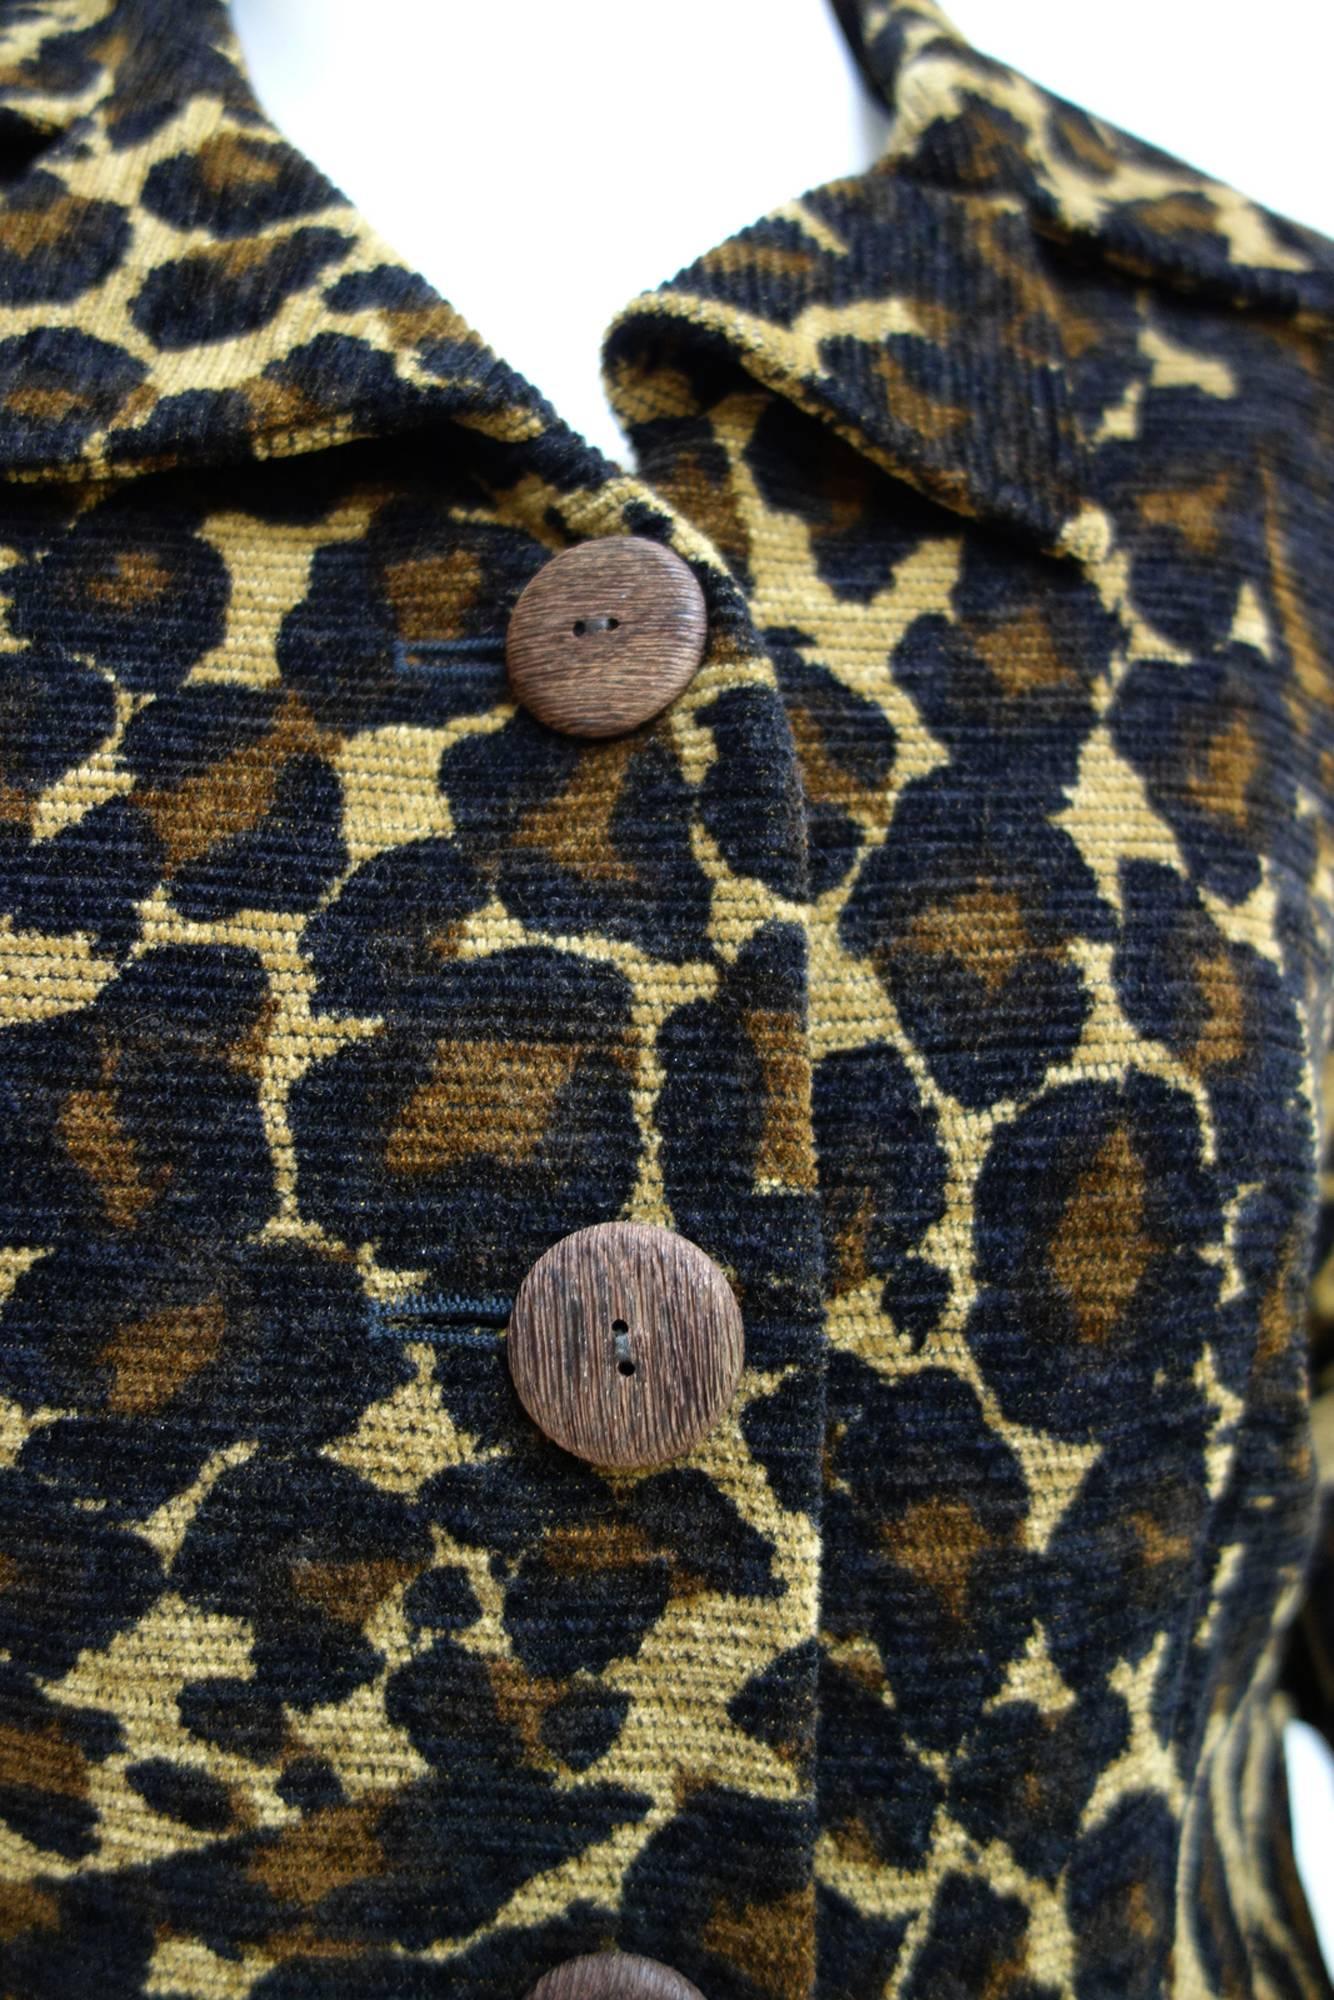 Vintage Yves Saint Lauren Rive Gauche Leopard Print Jacket Blazer
Size 36 FR​ / 2-4 US
Velvety, corduroy style material, composed of: 
49% Rayon, 35% Nylon, 16% Acrylic
Fully lined with 100% Acetate 
Front Closure: Three large wooden